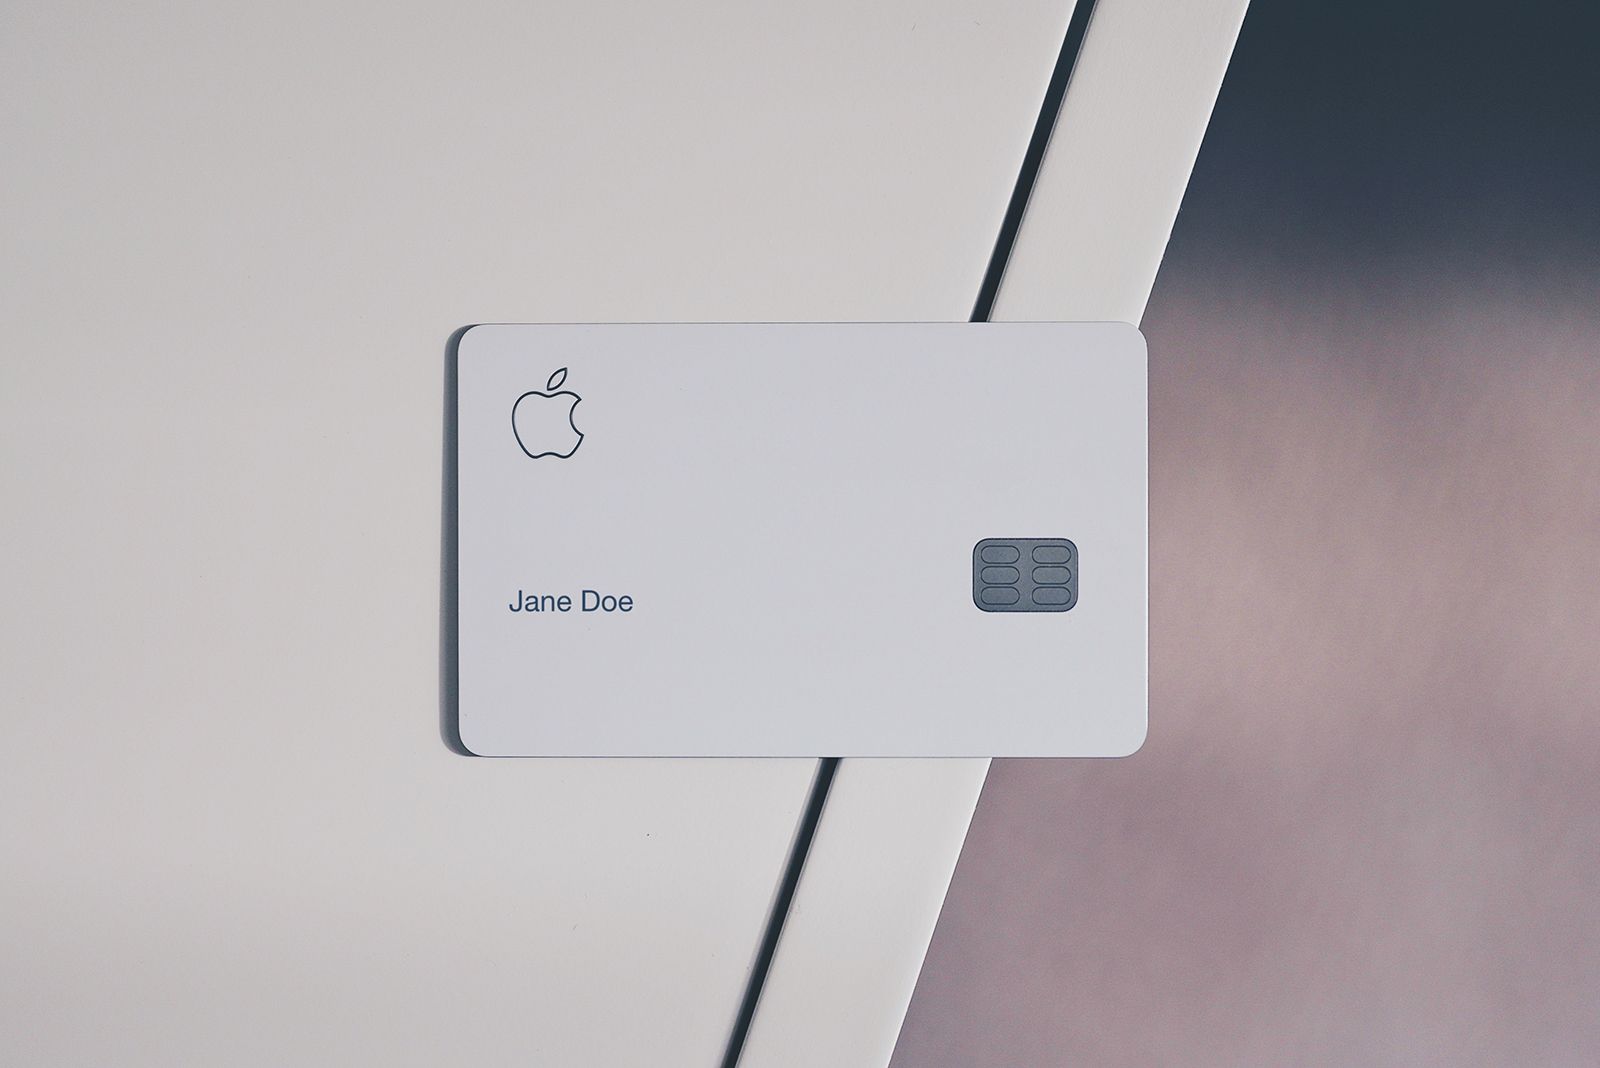 Apple might offer Apple Card monthly payment plans for AirPods iPads Macs image 1